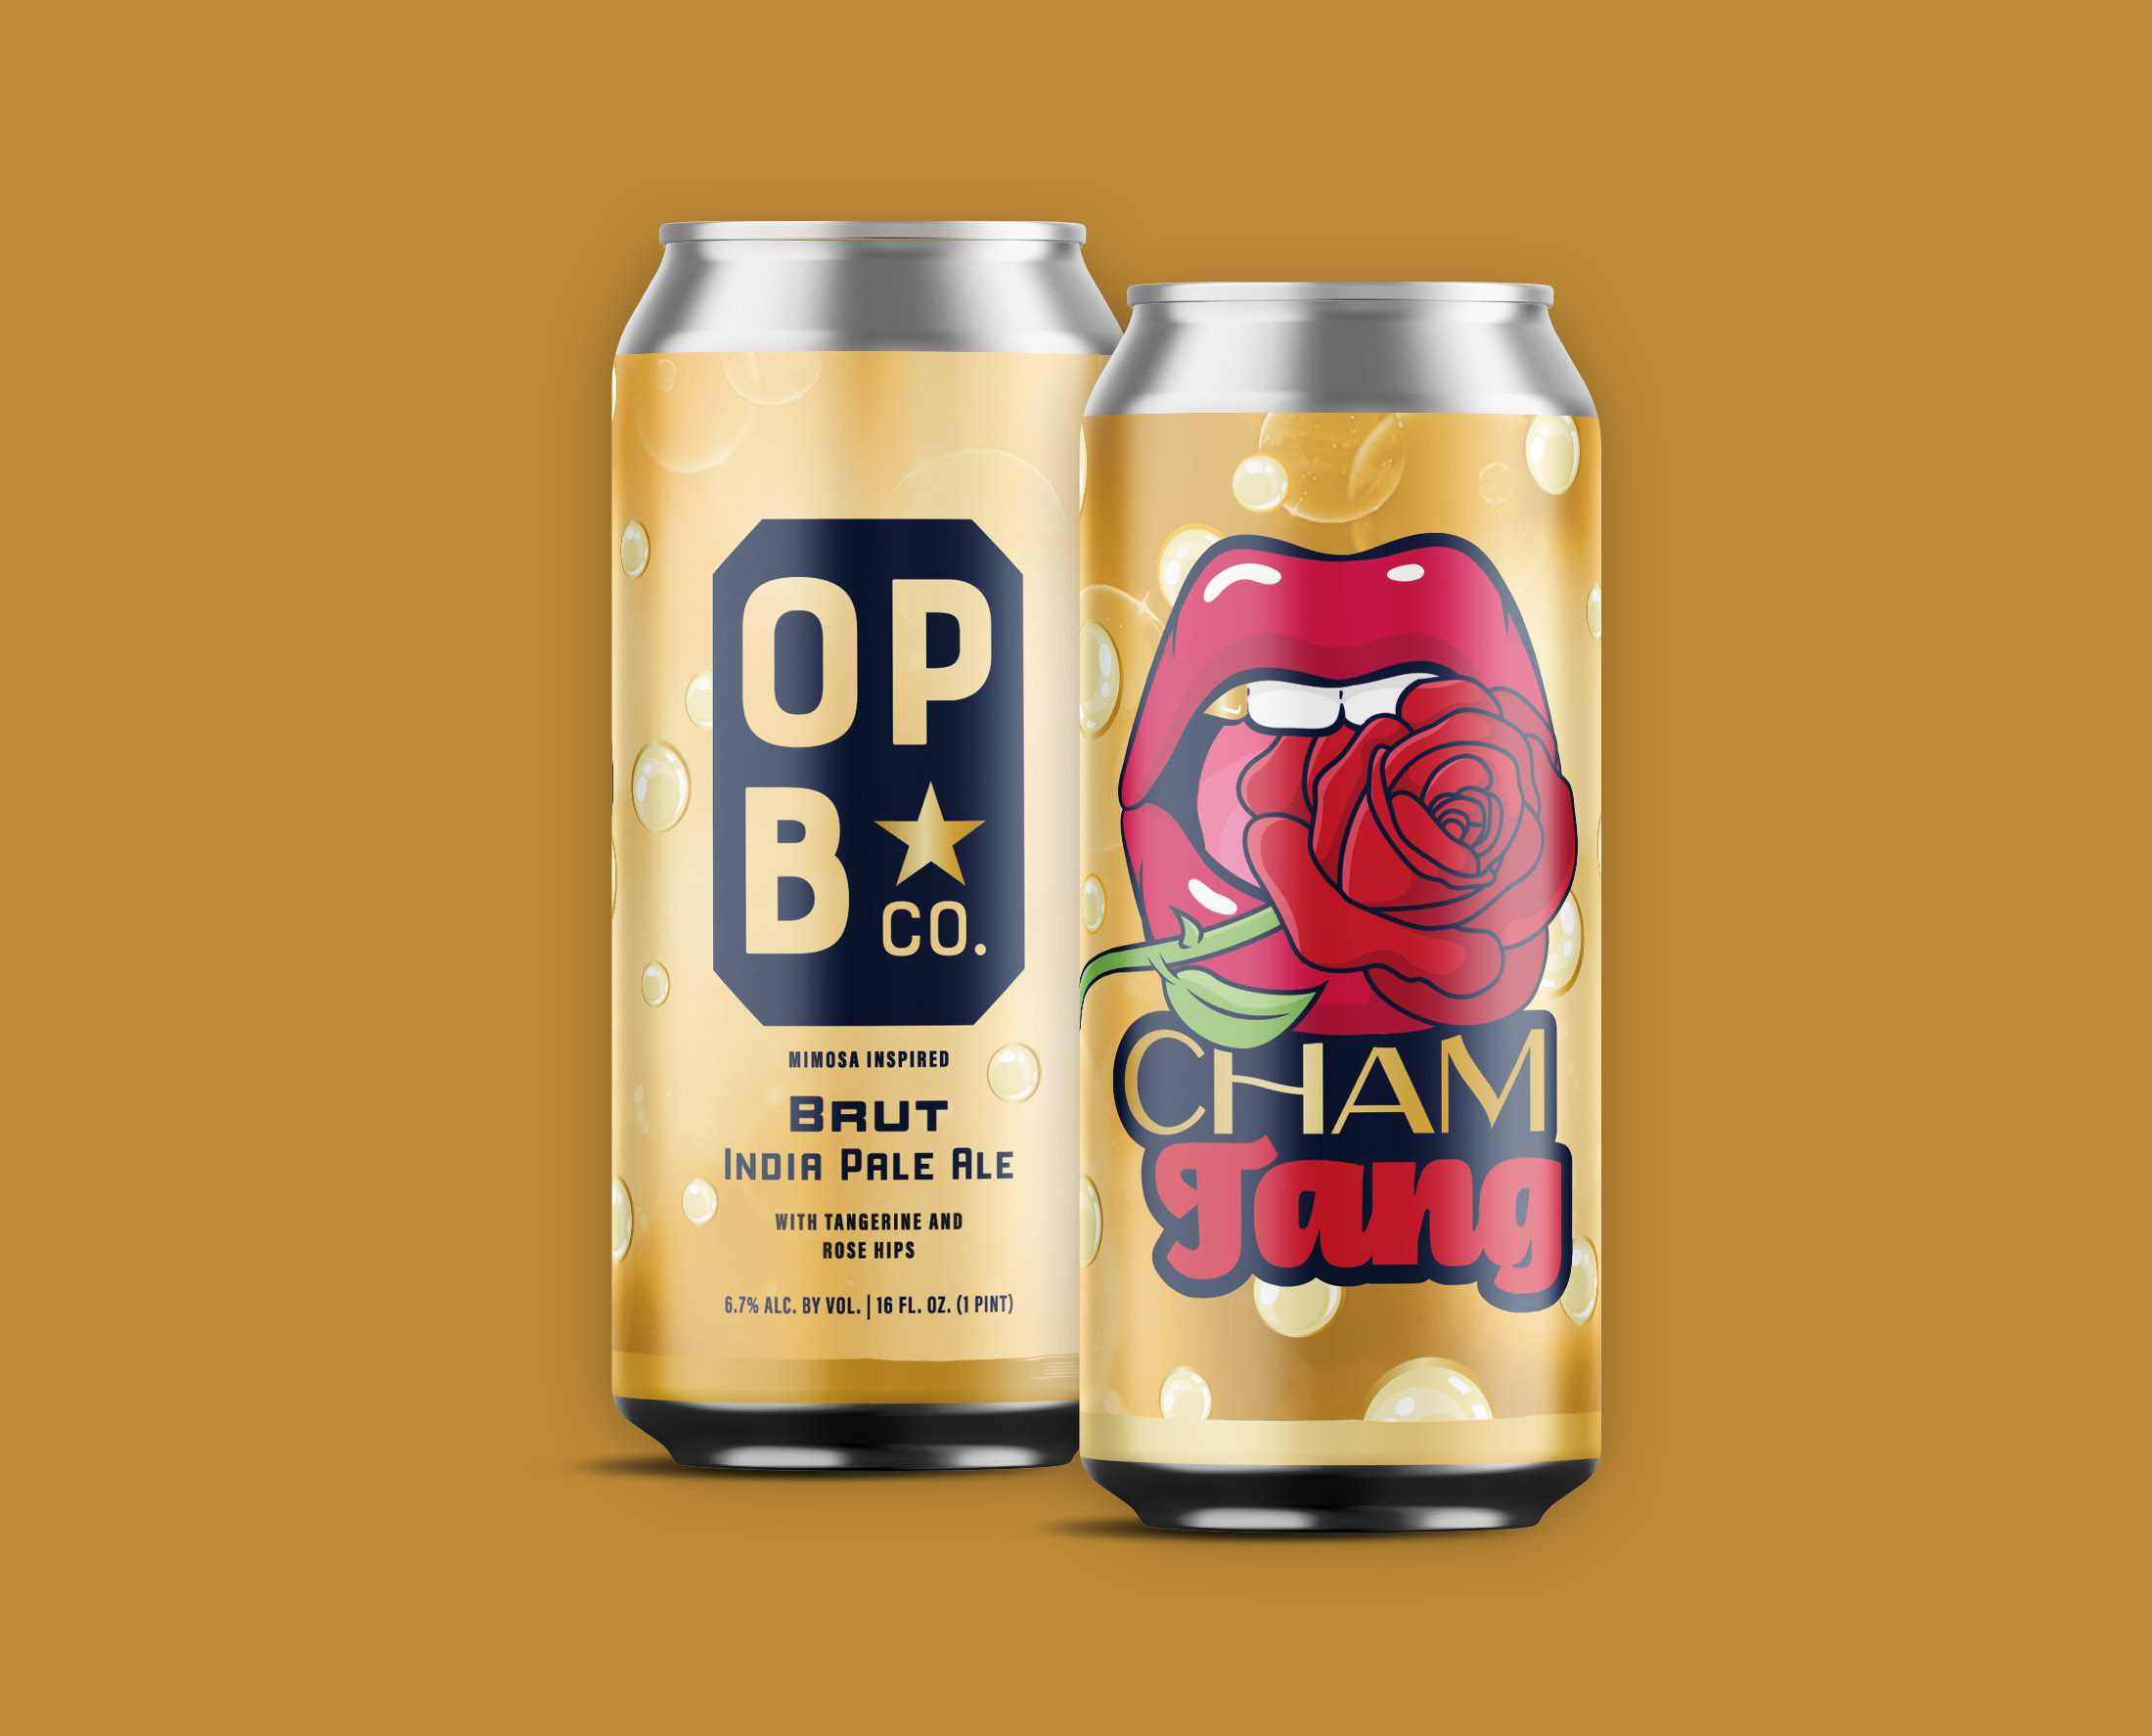 digital rendering of the Cham tang brut IPA beer. 2 cans